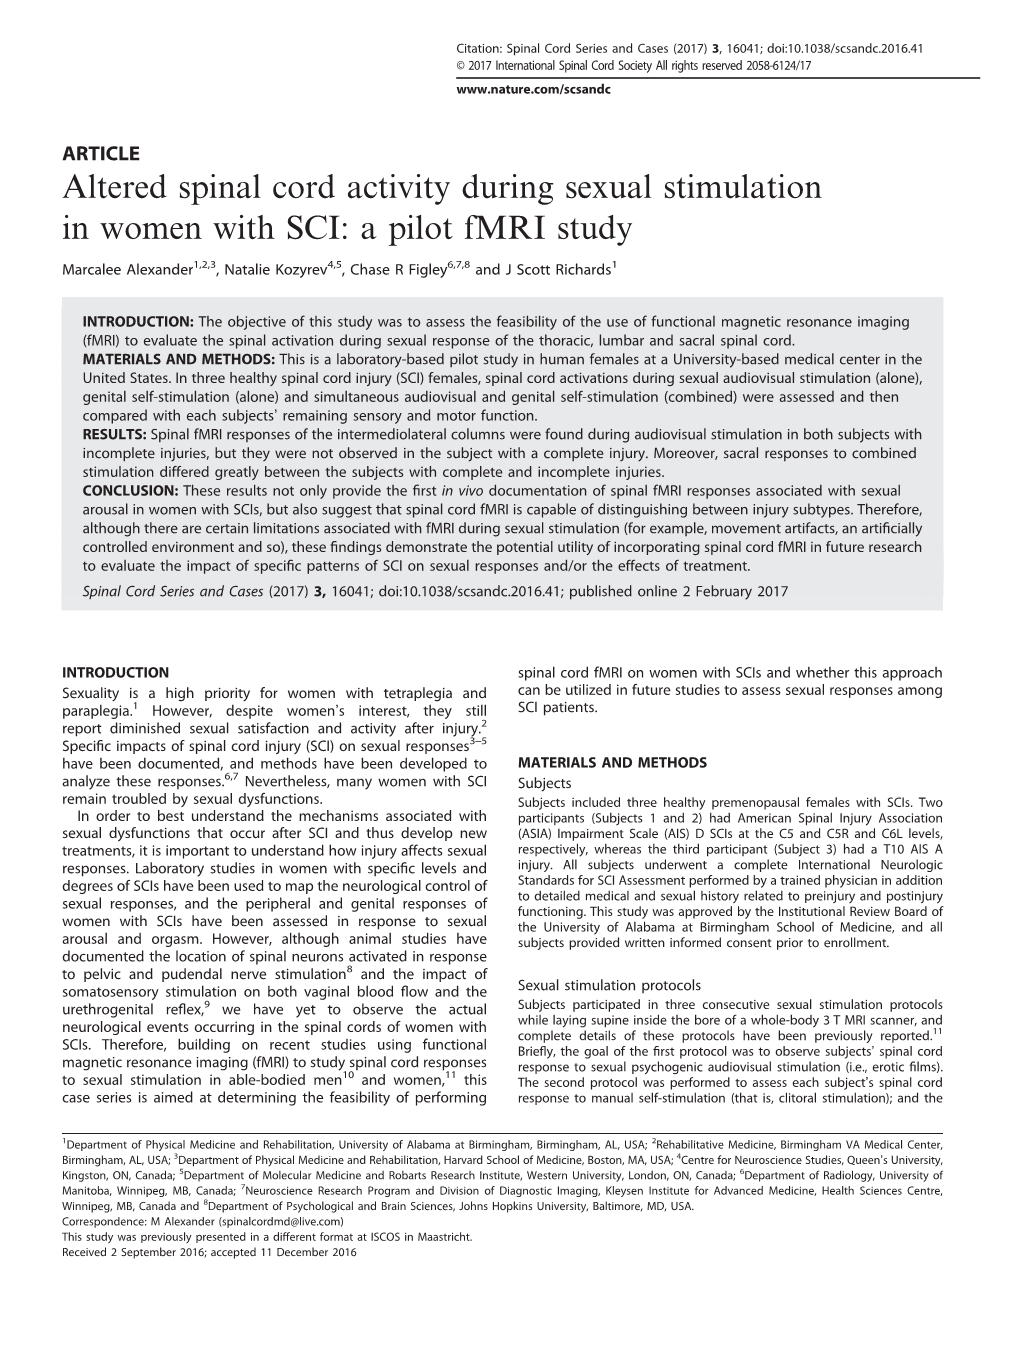 Altered Spinal Cord Activity During Sexual Stimulation in Women with SCI: a Pilot Fmri Study